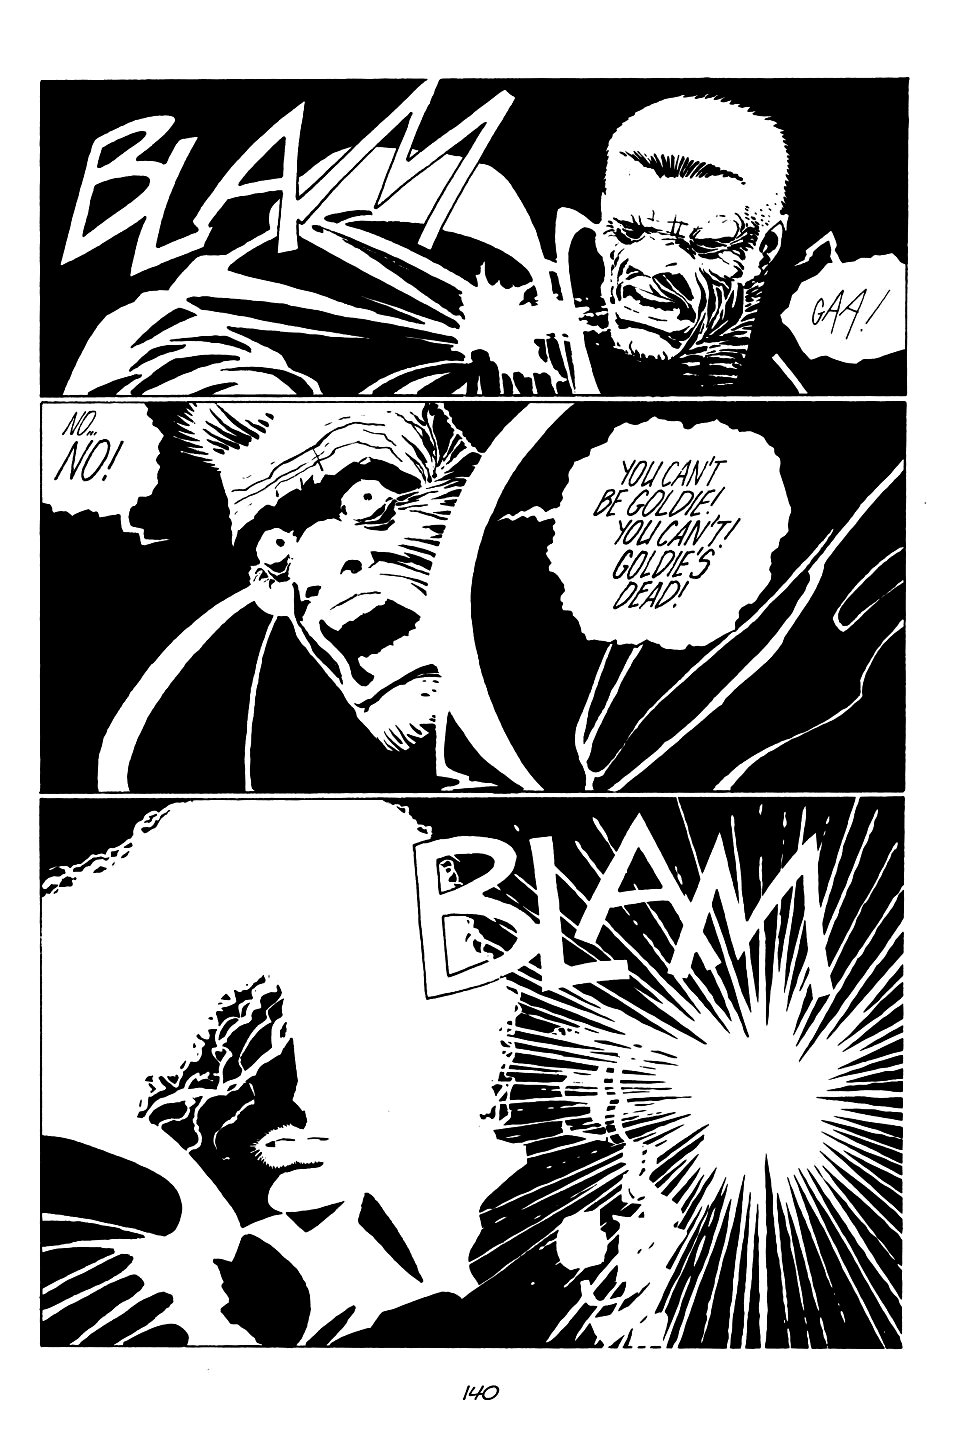 page 140 of sin city 1 the hard goodbye